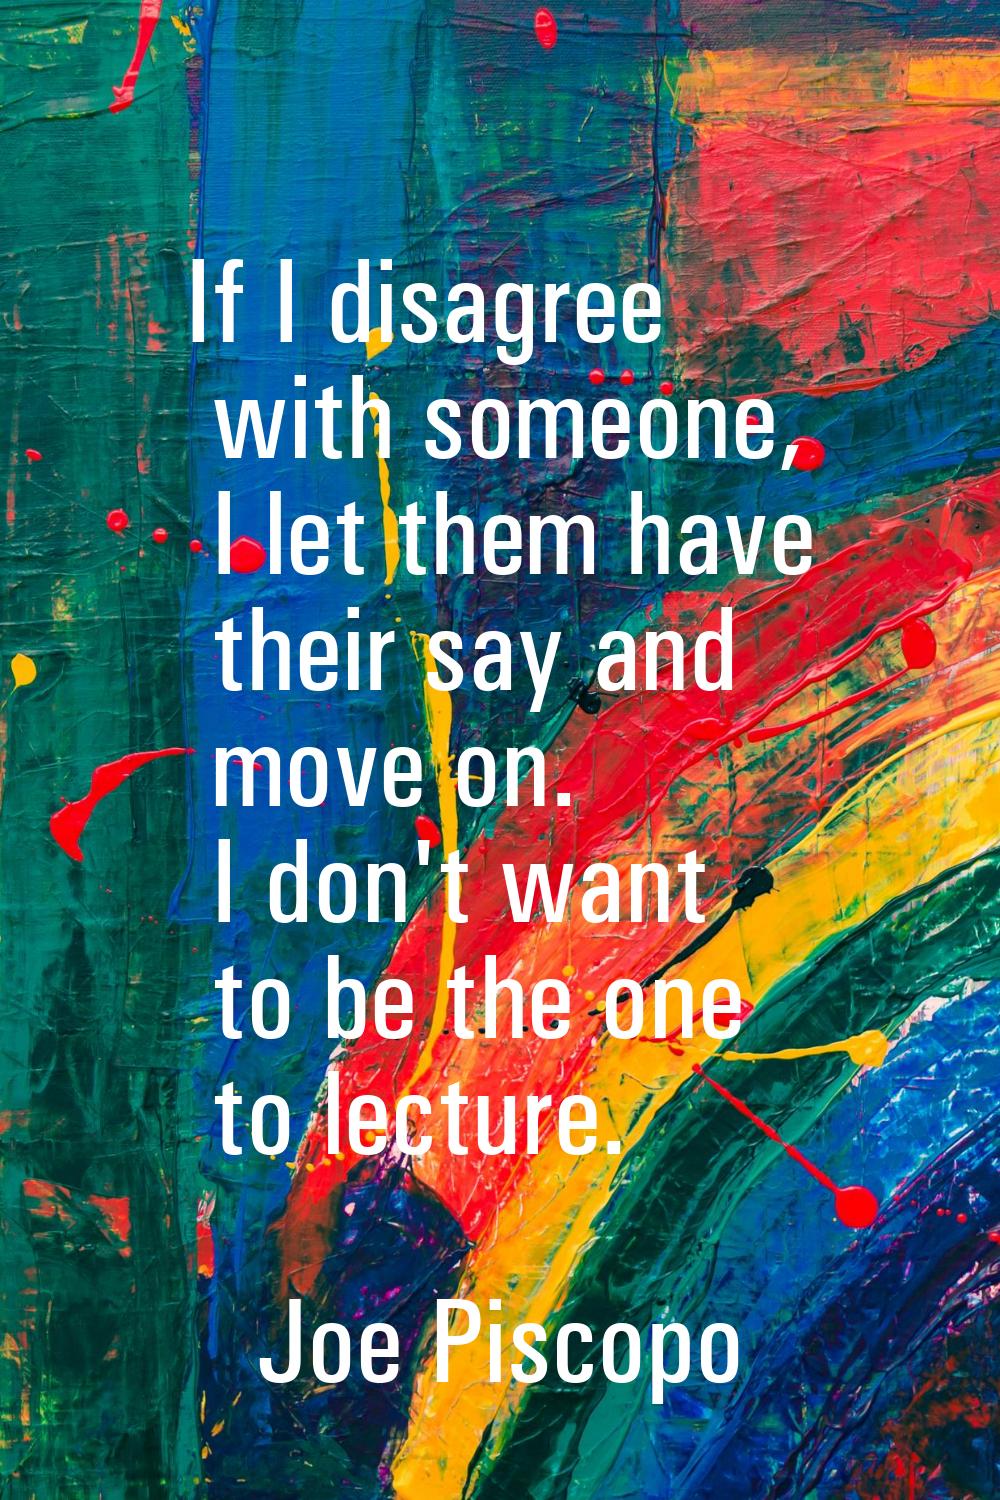 If I disagree with someone, I let them have their say and move on. I don't want to be the one to le